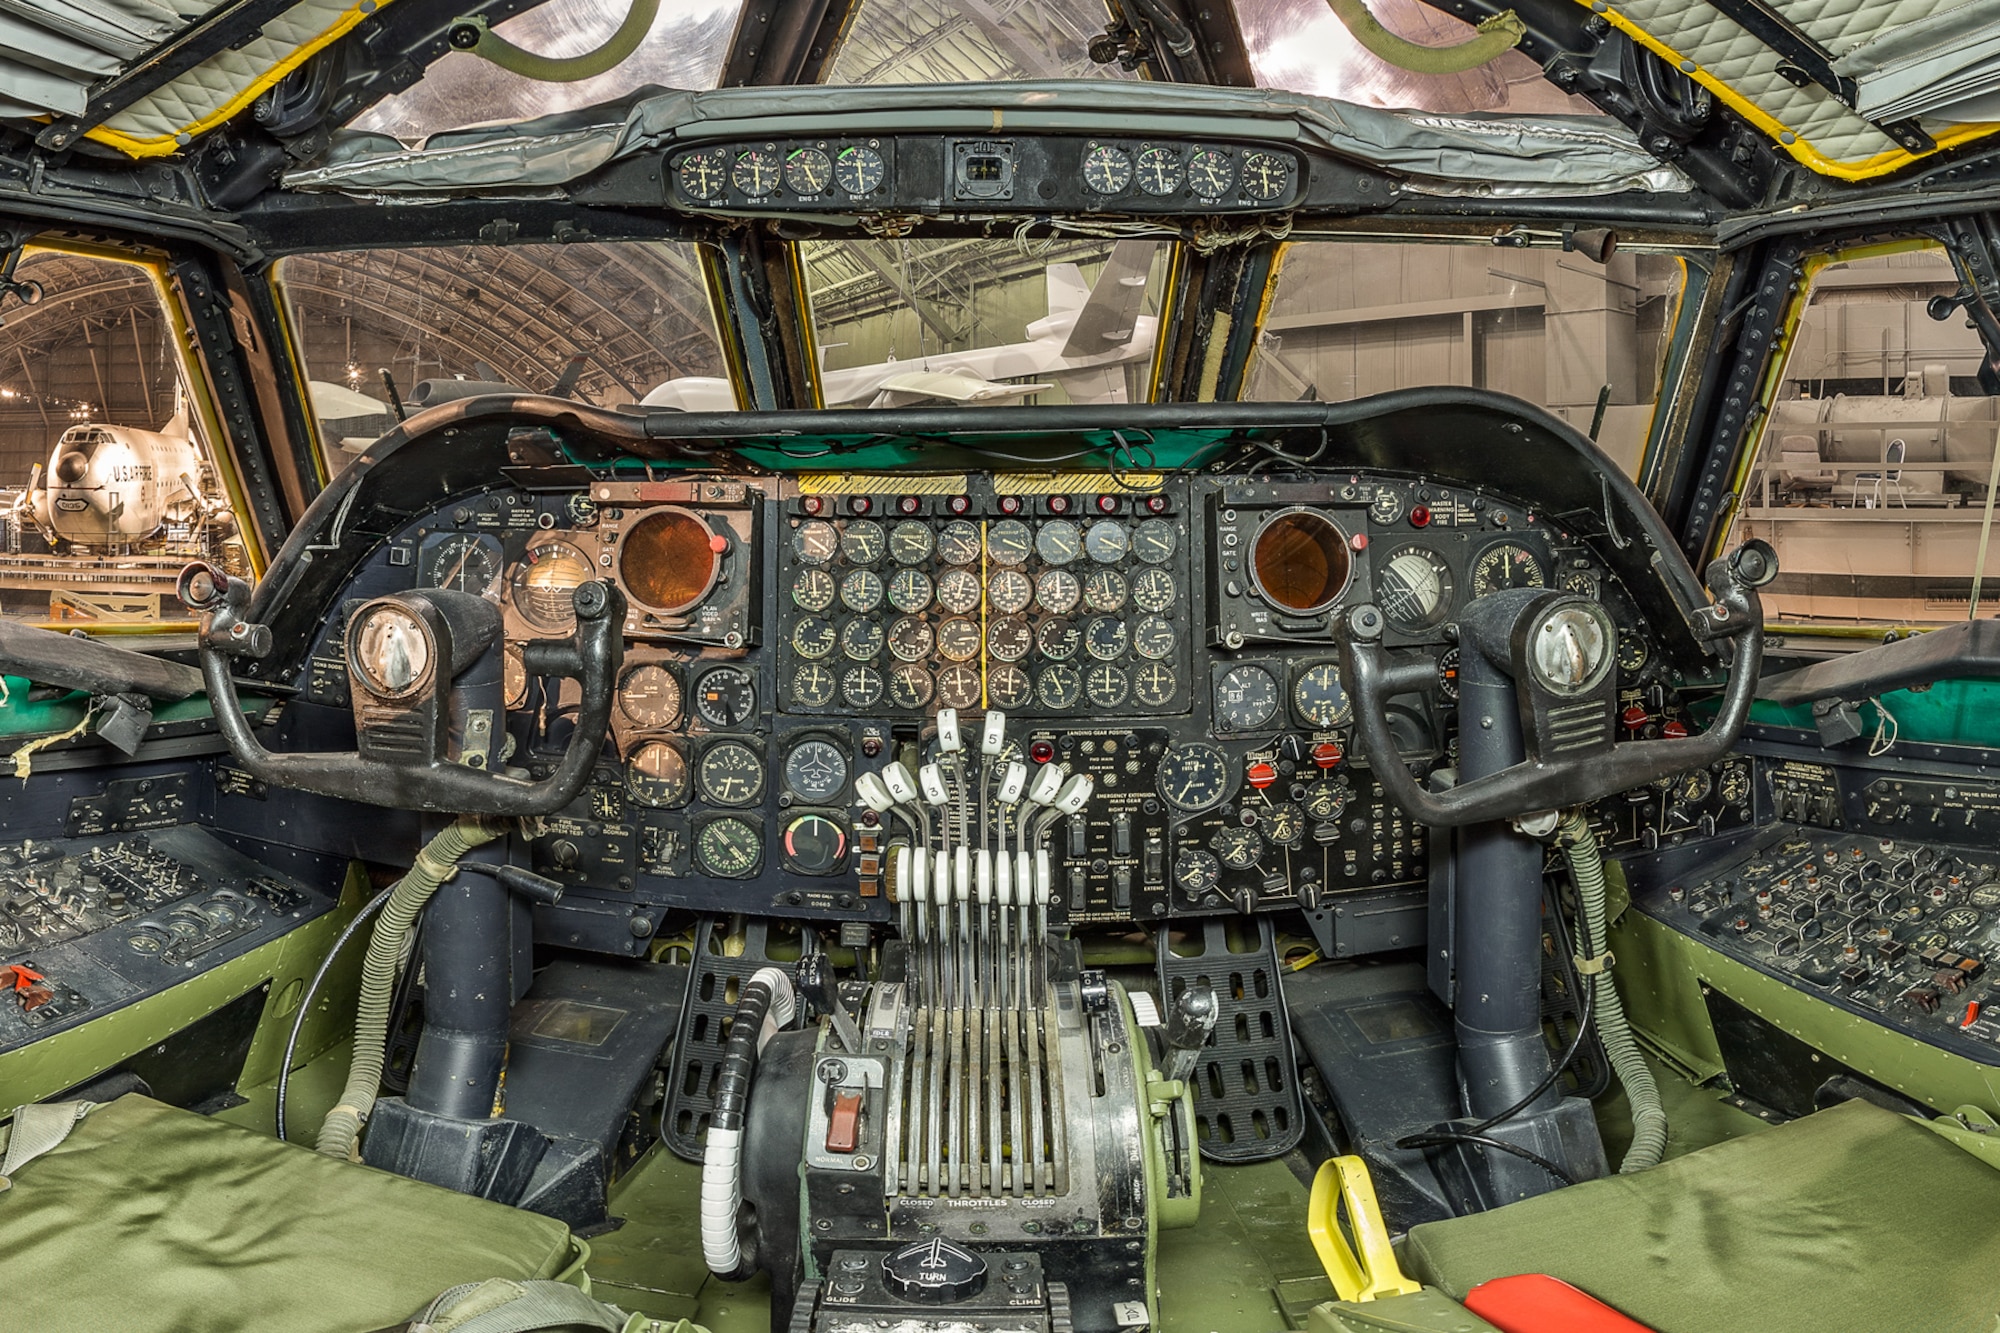 DAYTON, Ohio -- Boeing B-52D Stratofortress cockpit view at the National Museum of the United States Air Force.(Photo courtesy of Lyle Jansma, Aerocapture Images)